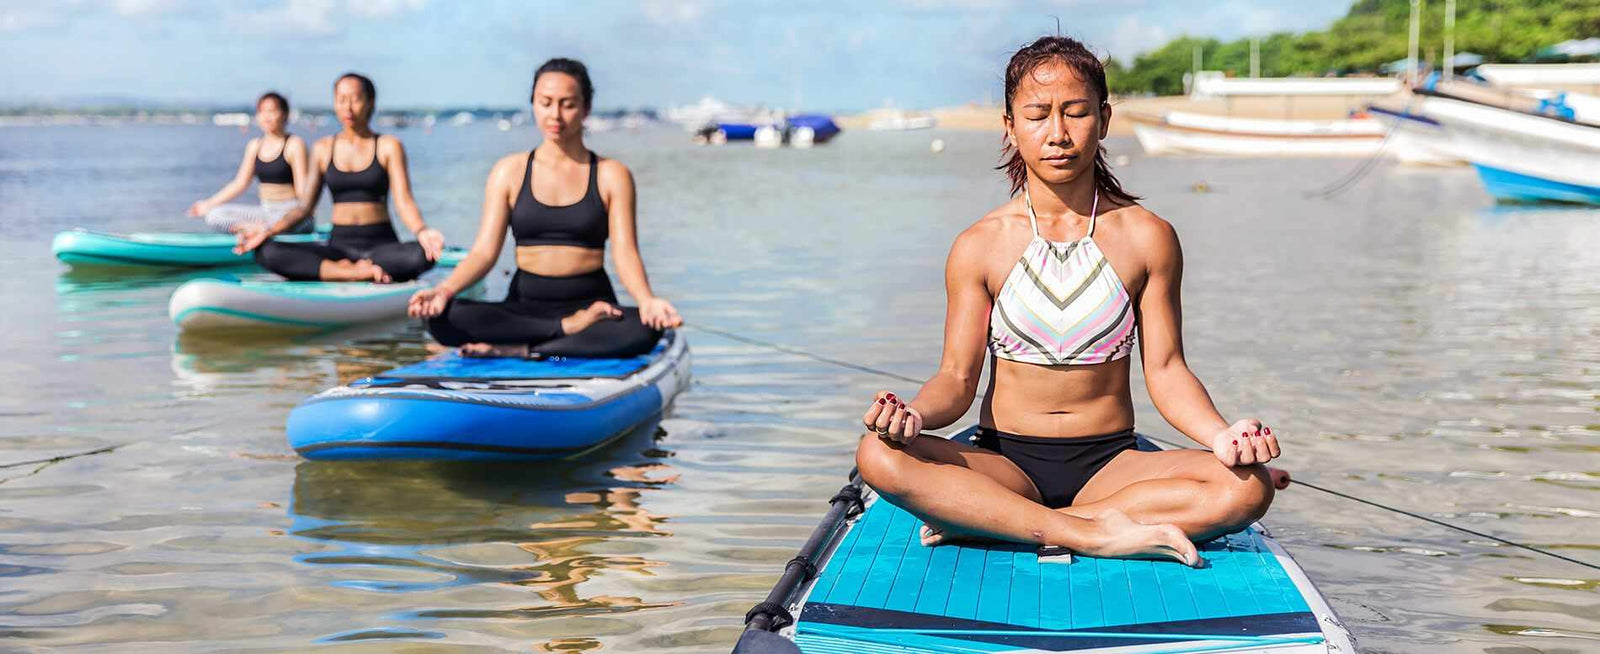 12 Paddle Board Yoga Poses You Can Do Now (with pictures) - GILI